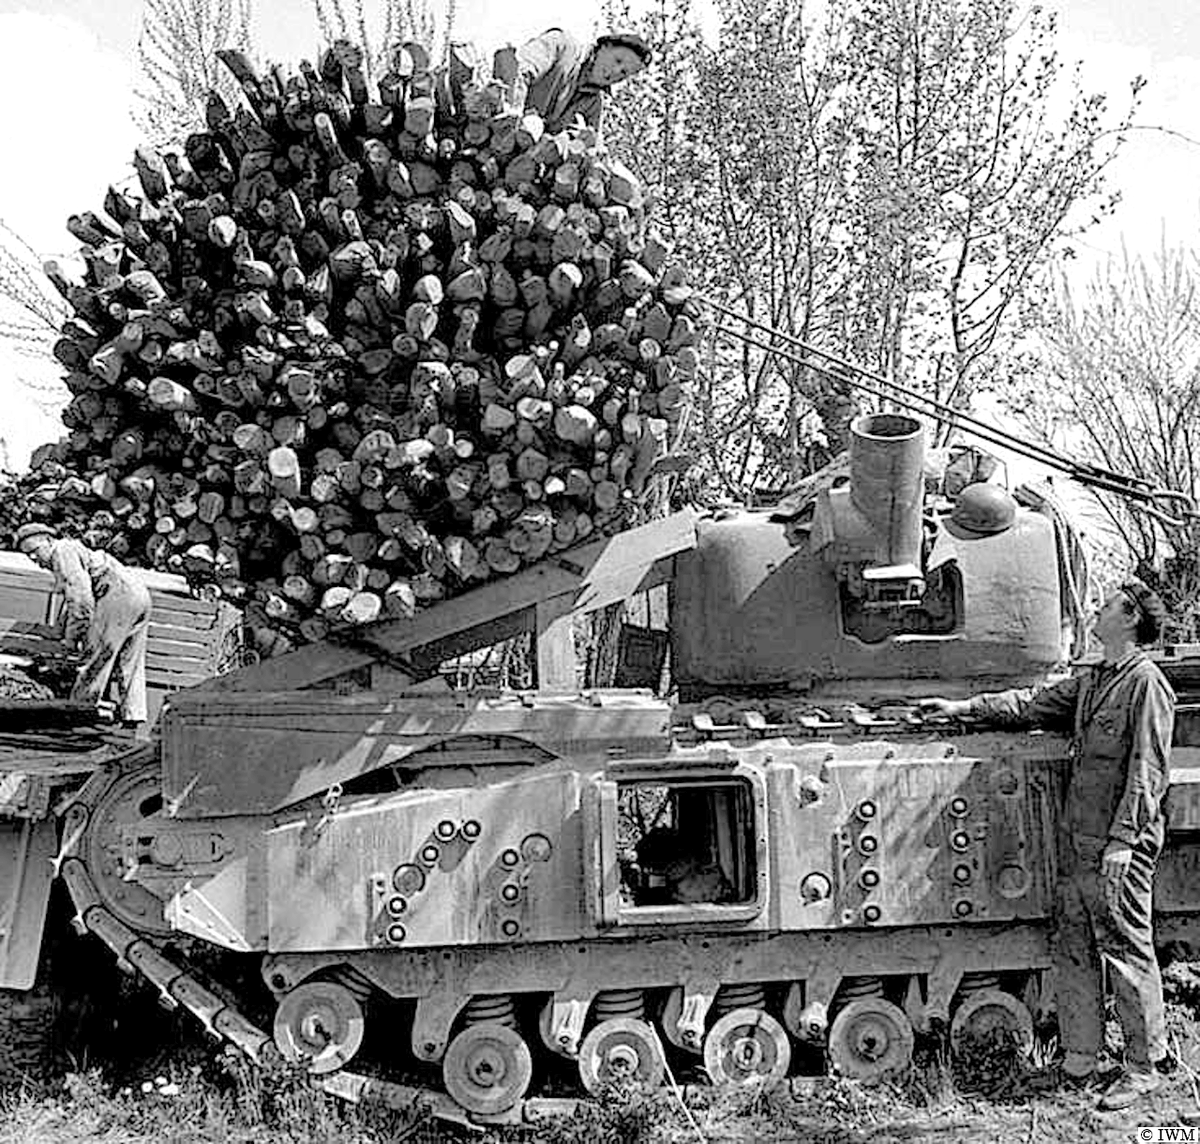 #OTD in 1945, Senio River area, Italy. A fascine is loaded onto a Churchill AVRE (equipped with a 290mm spigot mortar). #WW2 #HISTORY